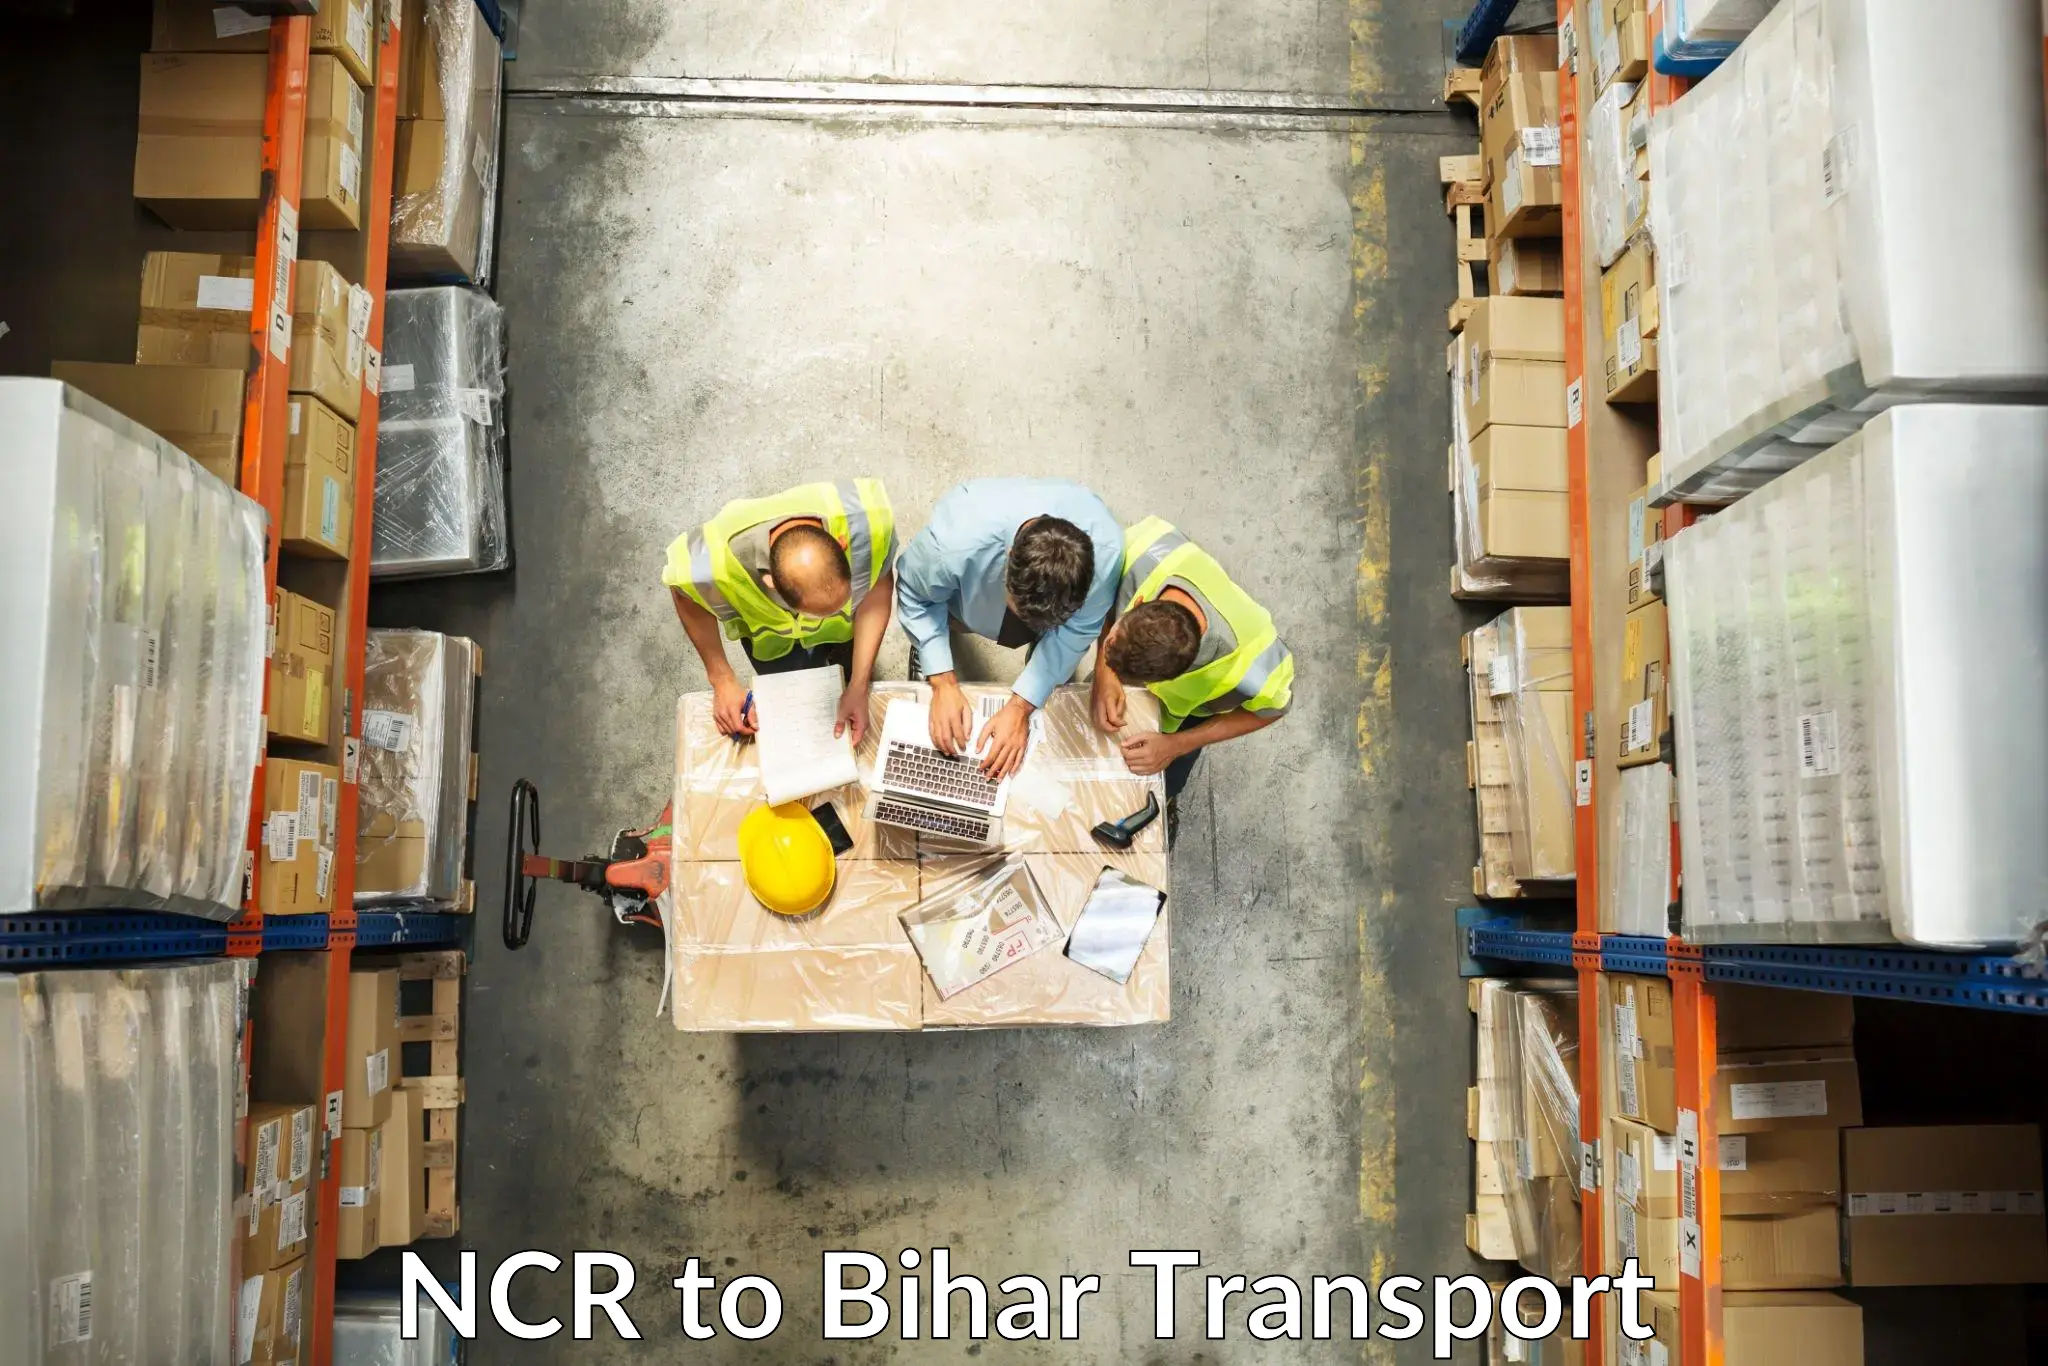 Container transport service NCR to Jhajha